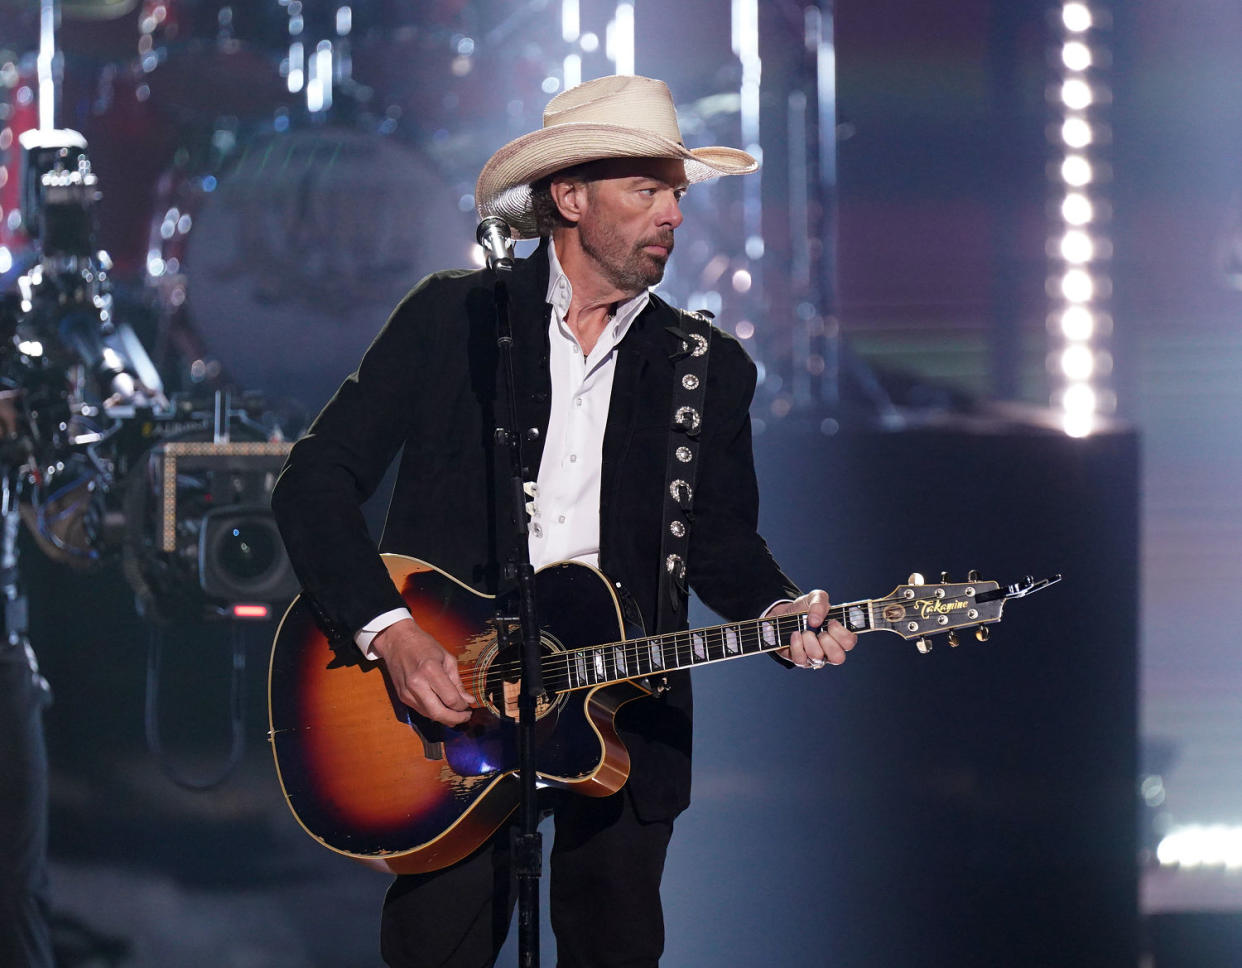 Toby Keith performs on stage during the awards show.  (Mickey Bernal/NBC / NBC via Getty Images)